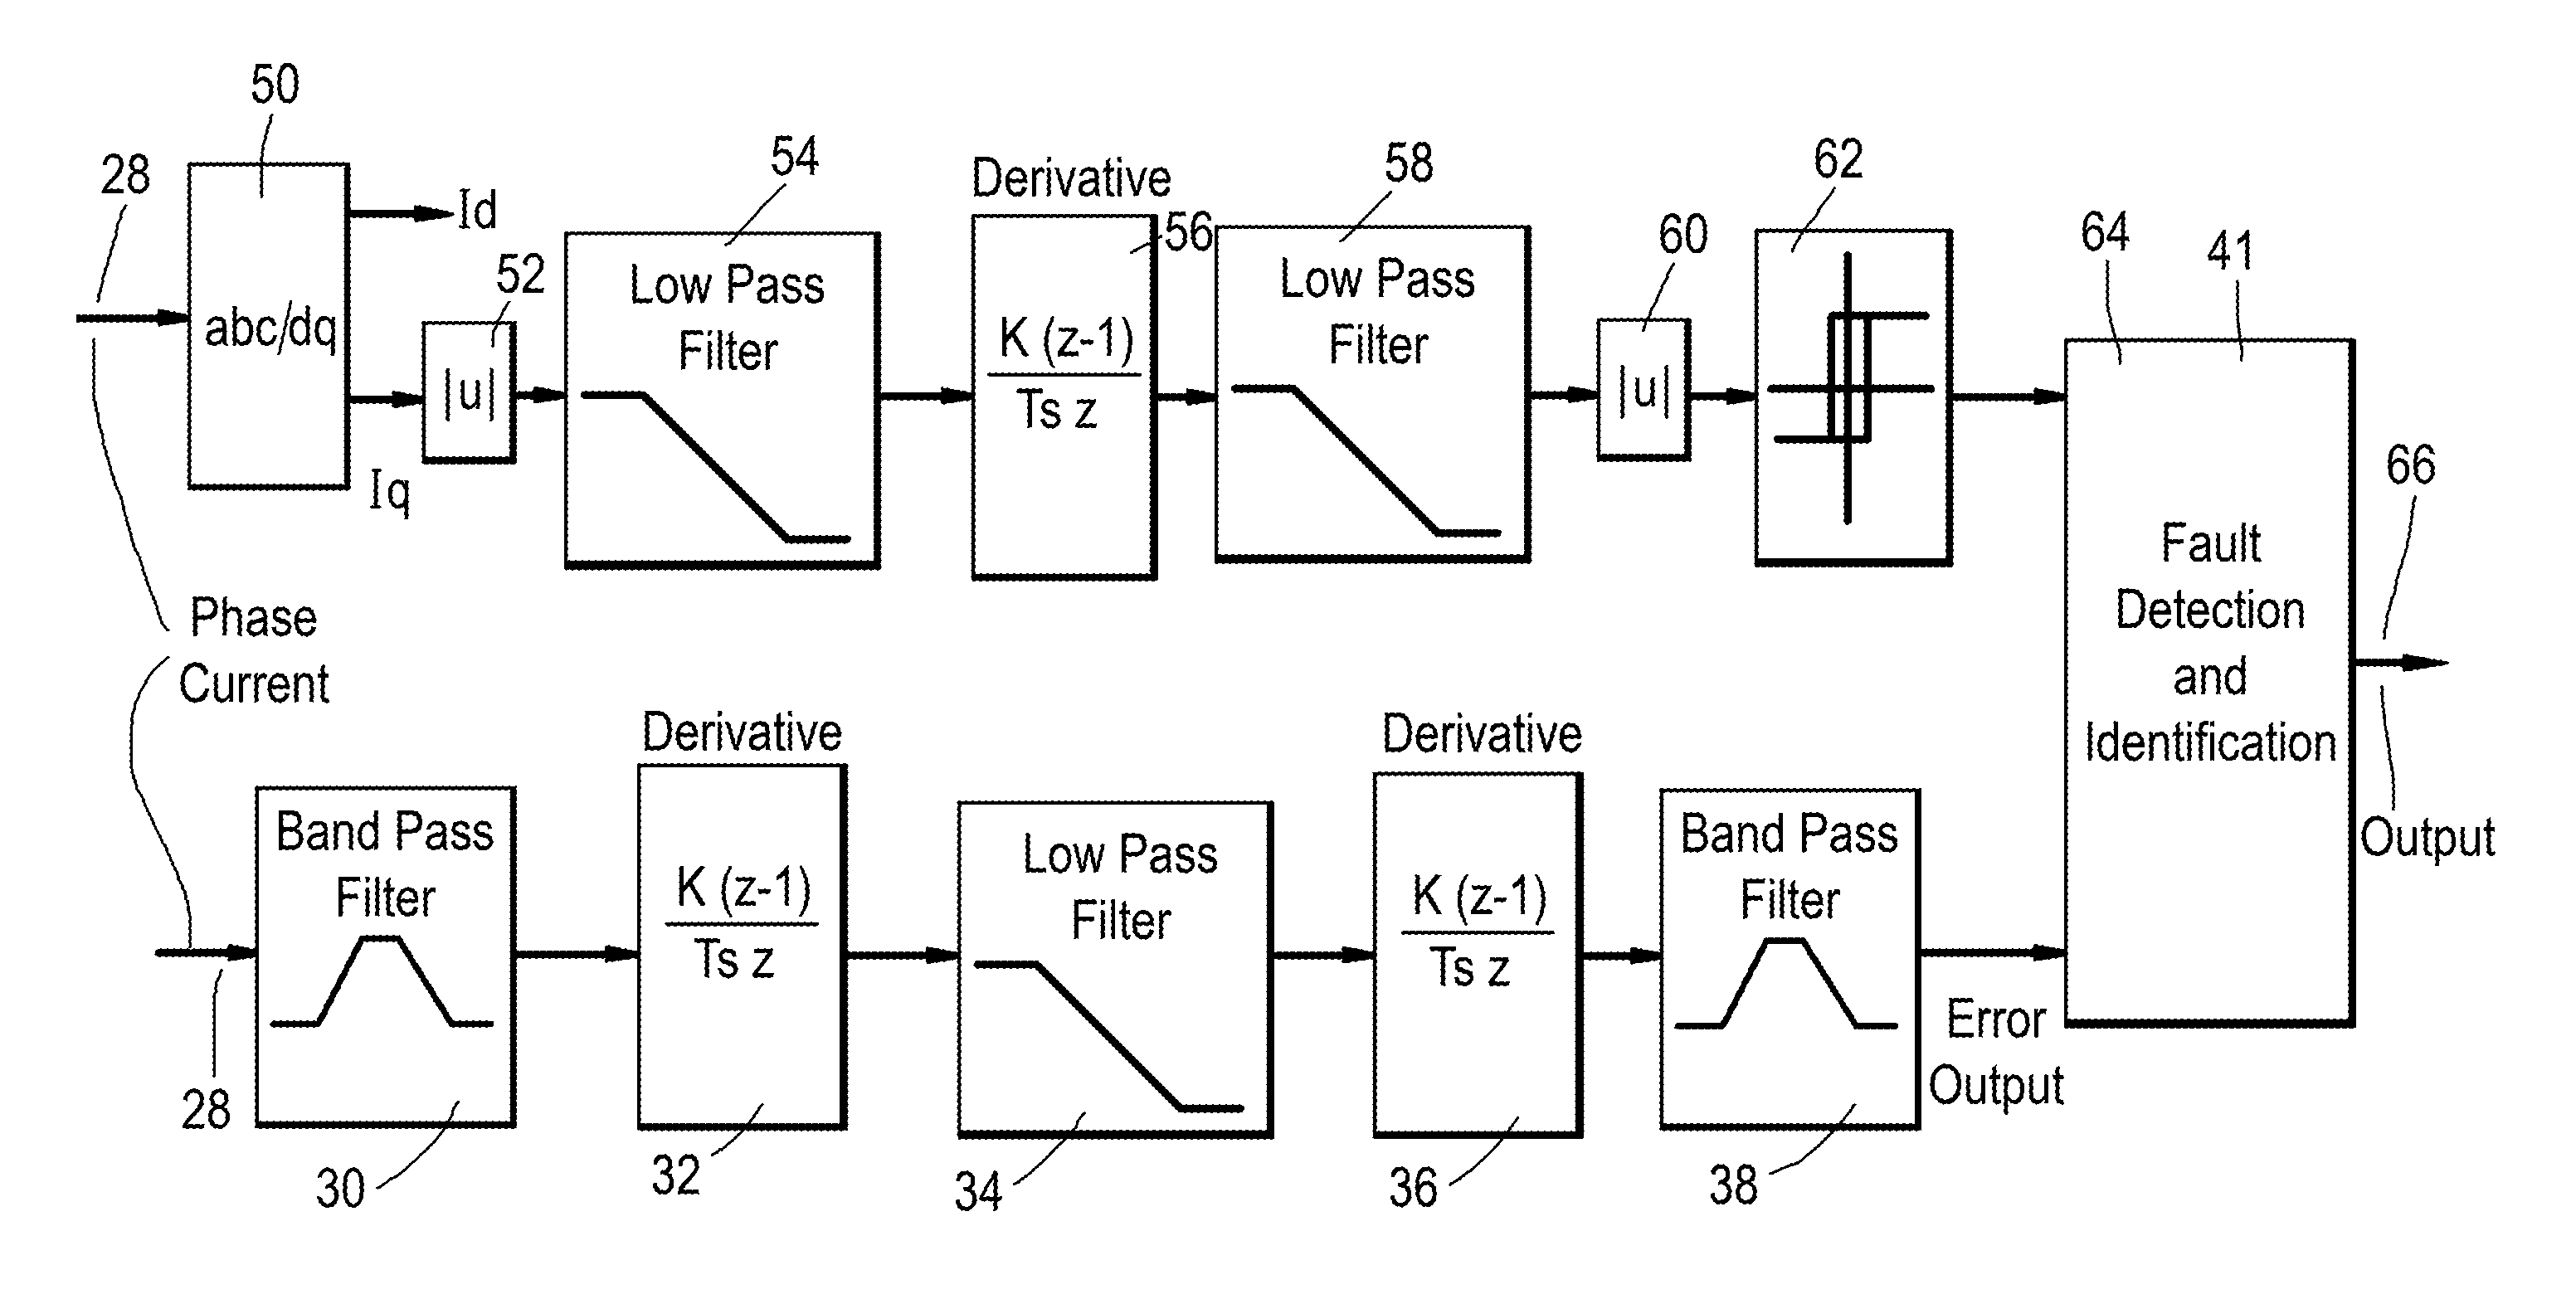 Open switch fault detection and identification in a two-level voltage source power converter